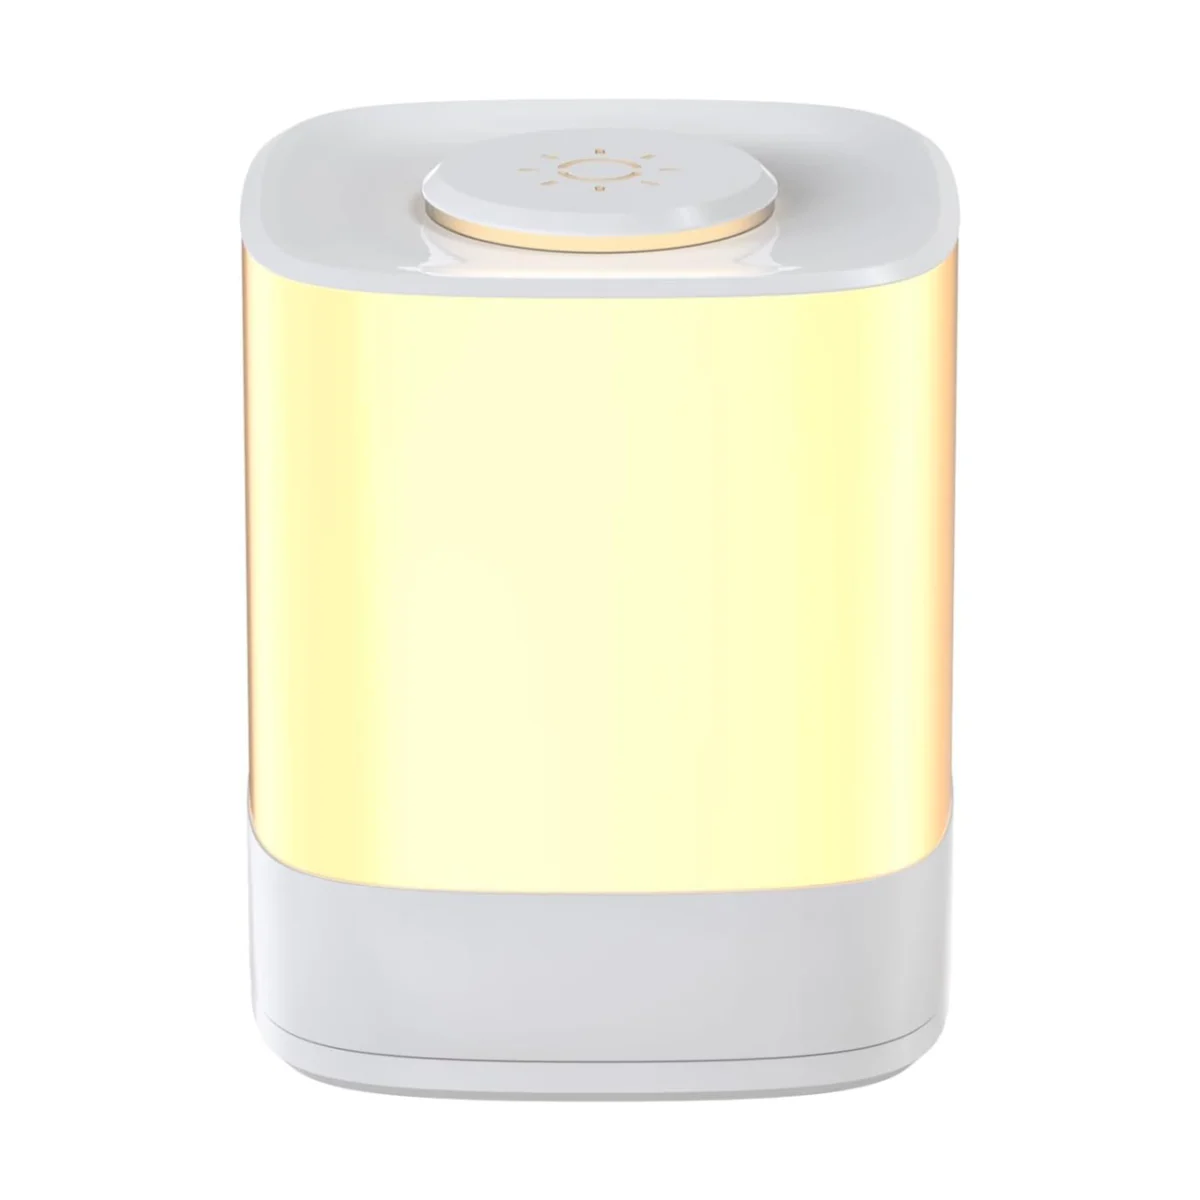 Bed side lamp rechargeable 4000mAh